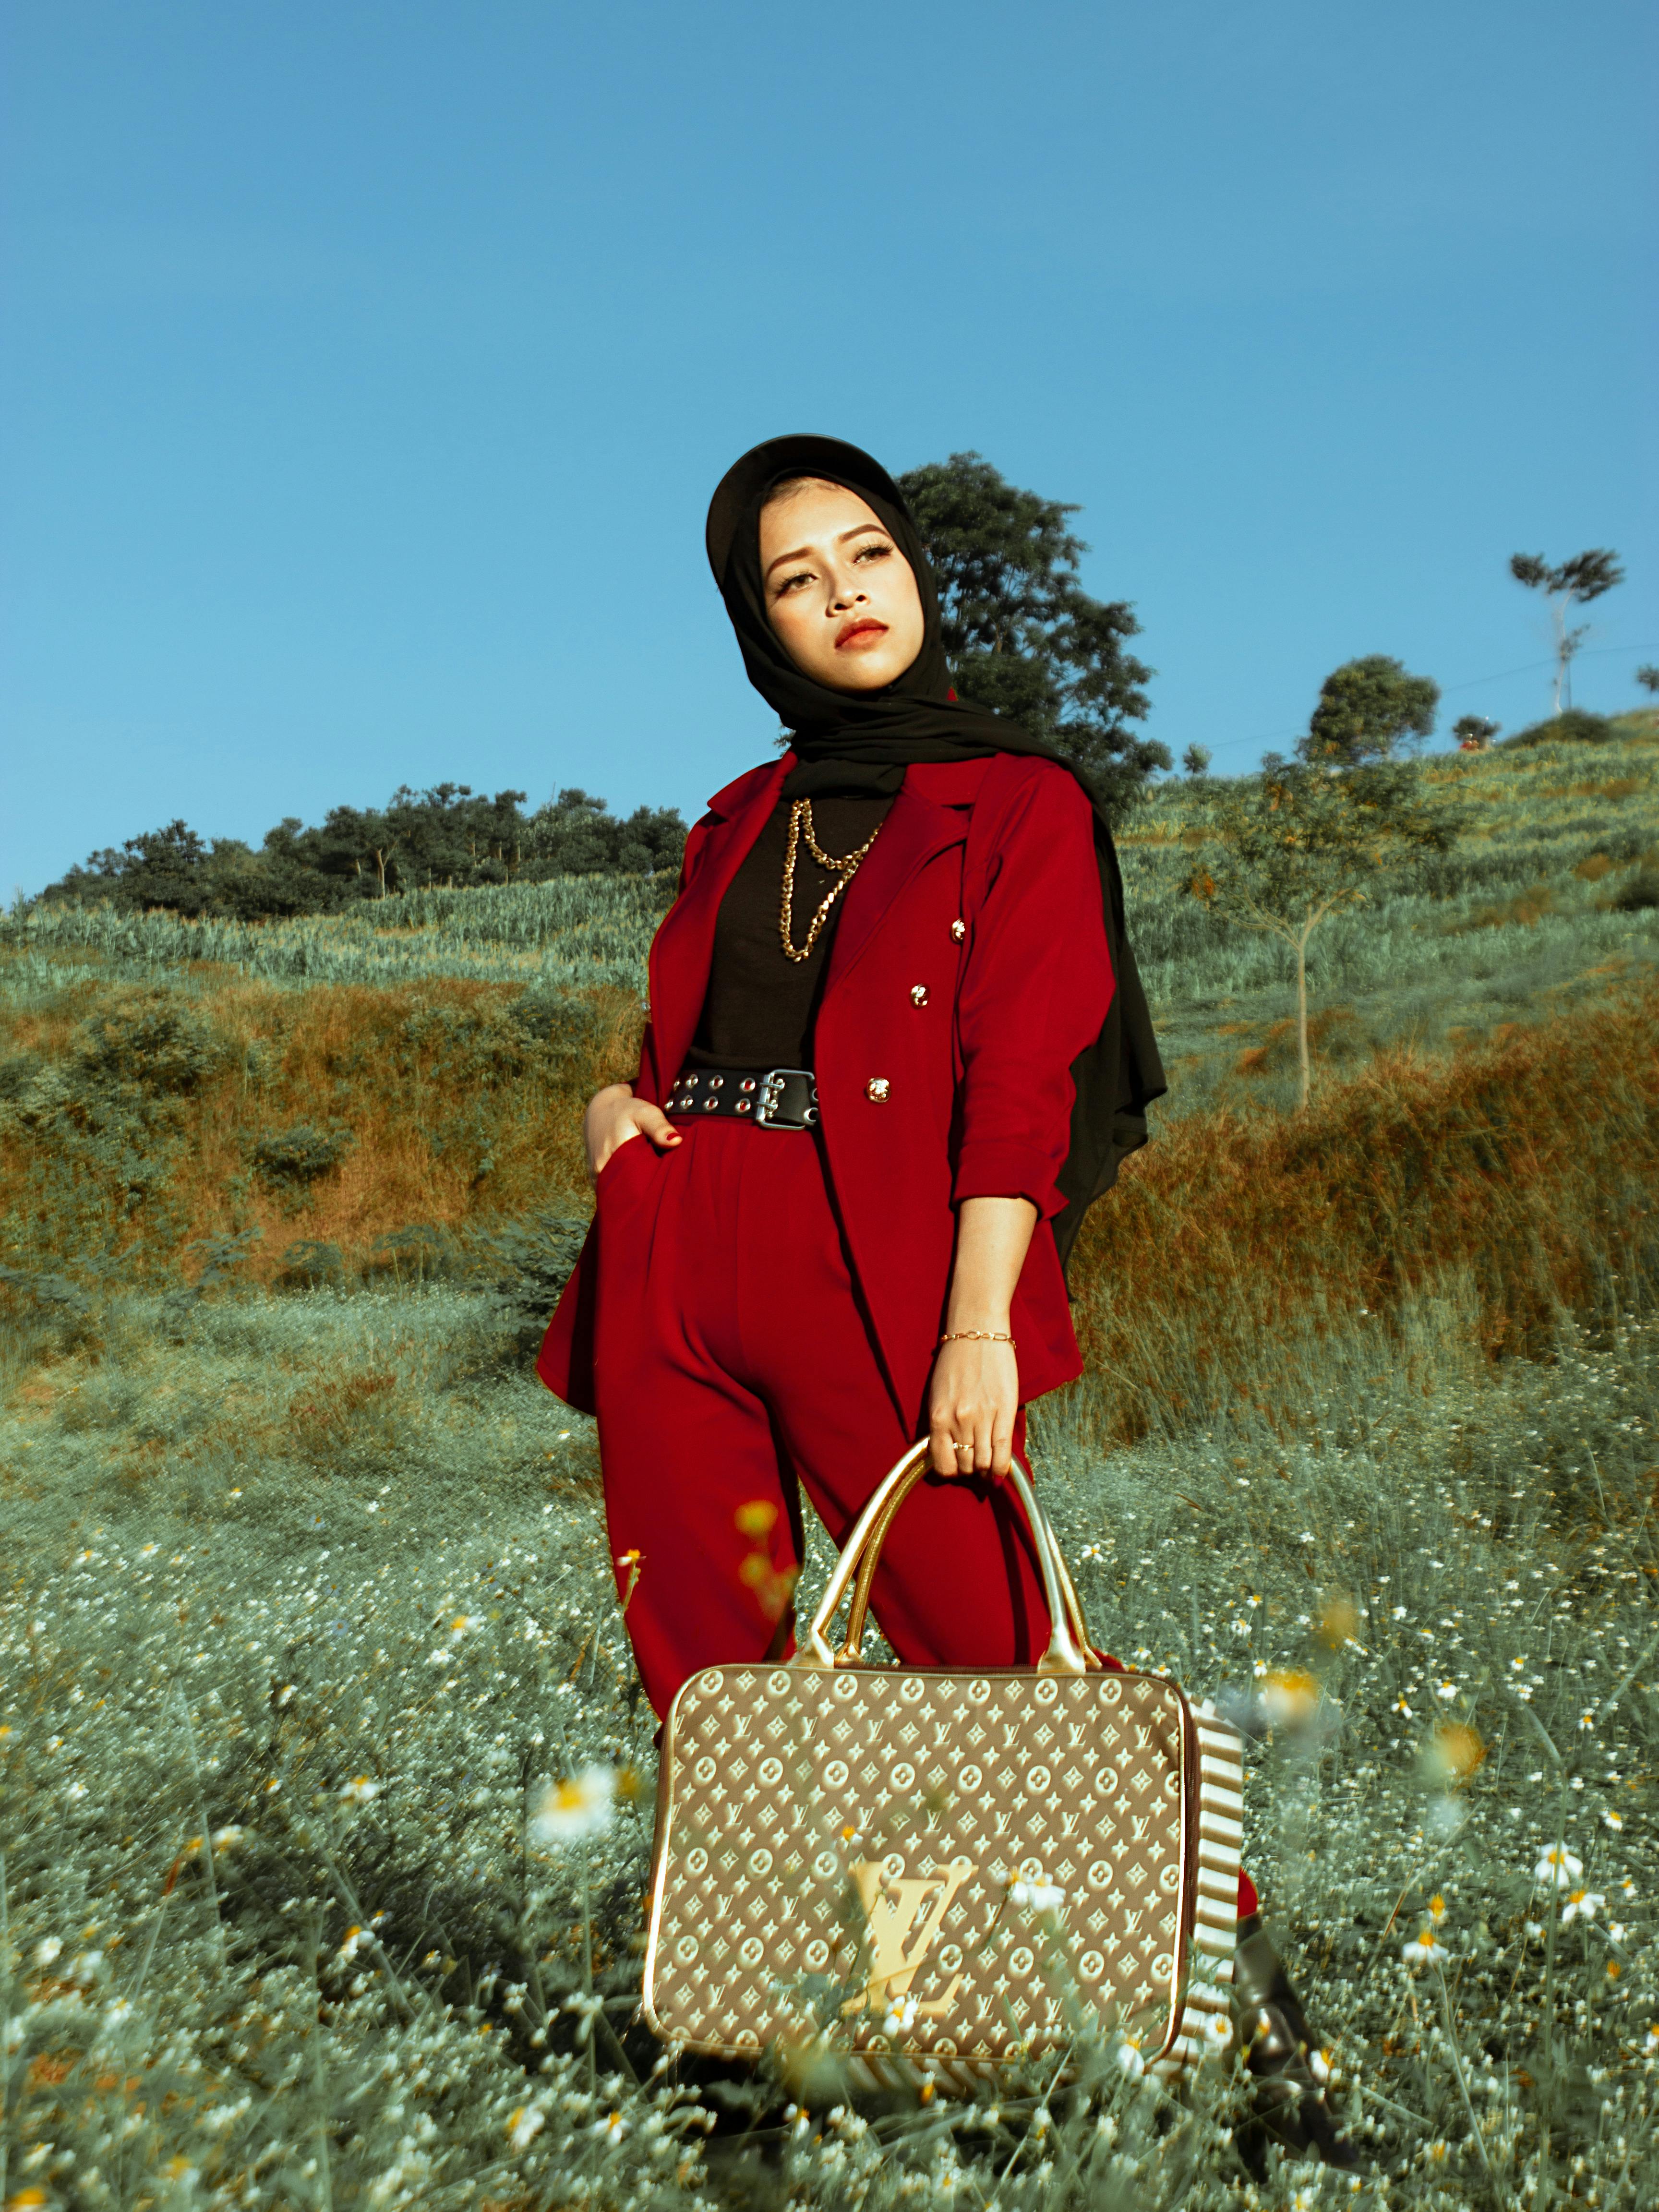 A Woman in Red Blazer and Pants Holding a Louis Vuitton Bag · Free Stock  Photo